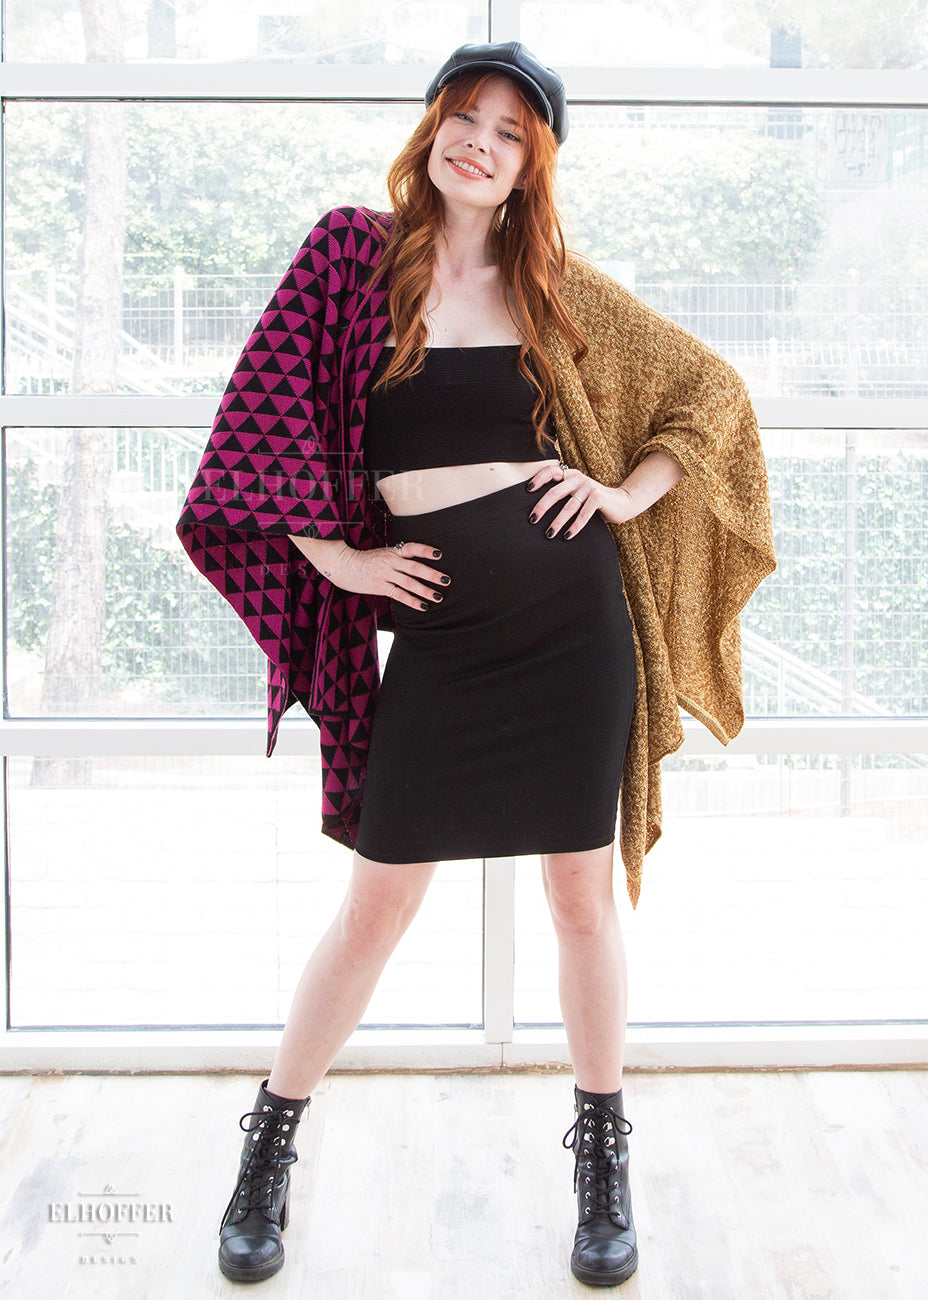 Chloe, a fair skinned ginger haired size XS model, wears the poncho with her hands on her hips. She pairs it with a black crop top, black bodycon skirt, black boots, and a black hat.